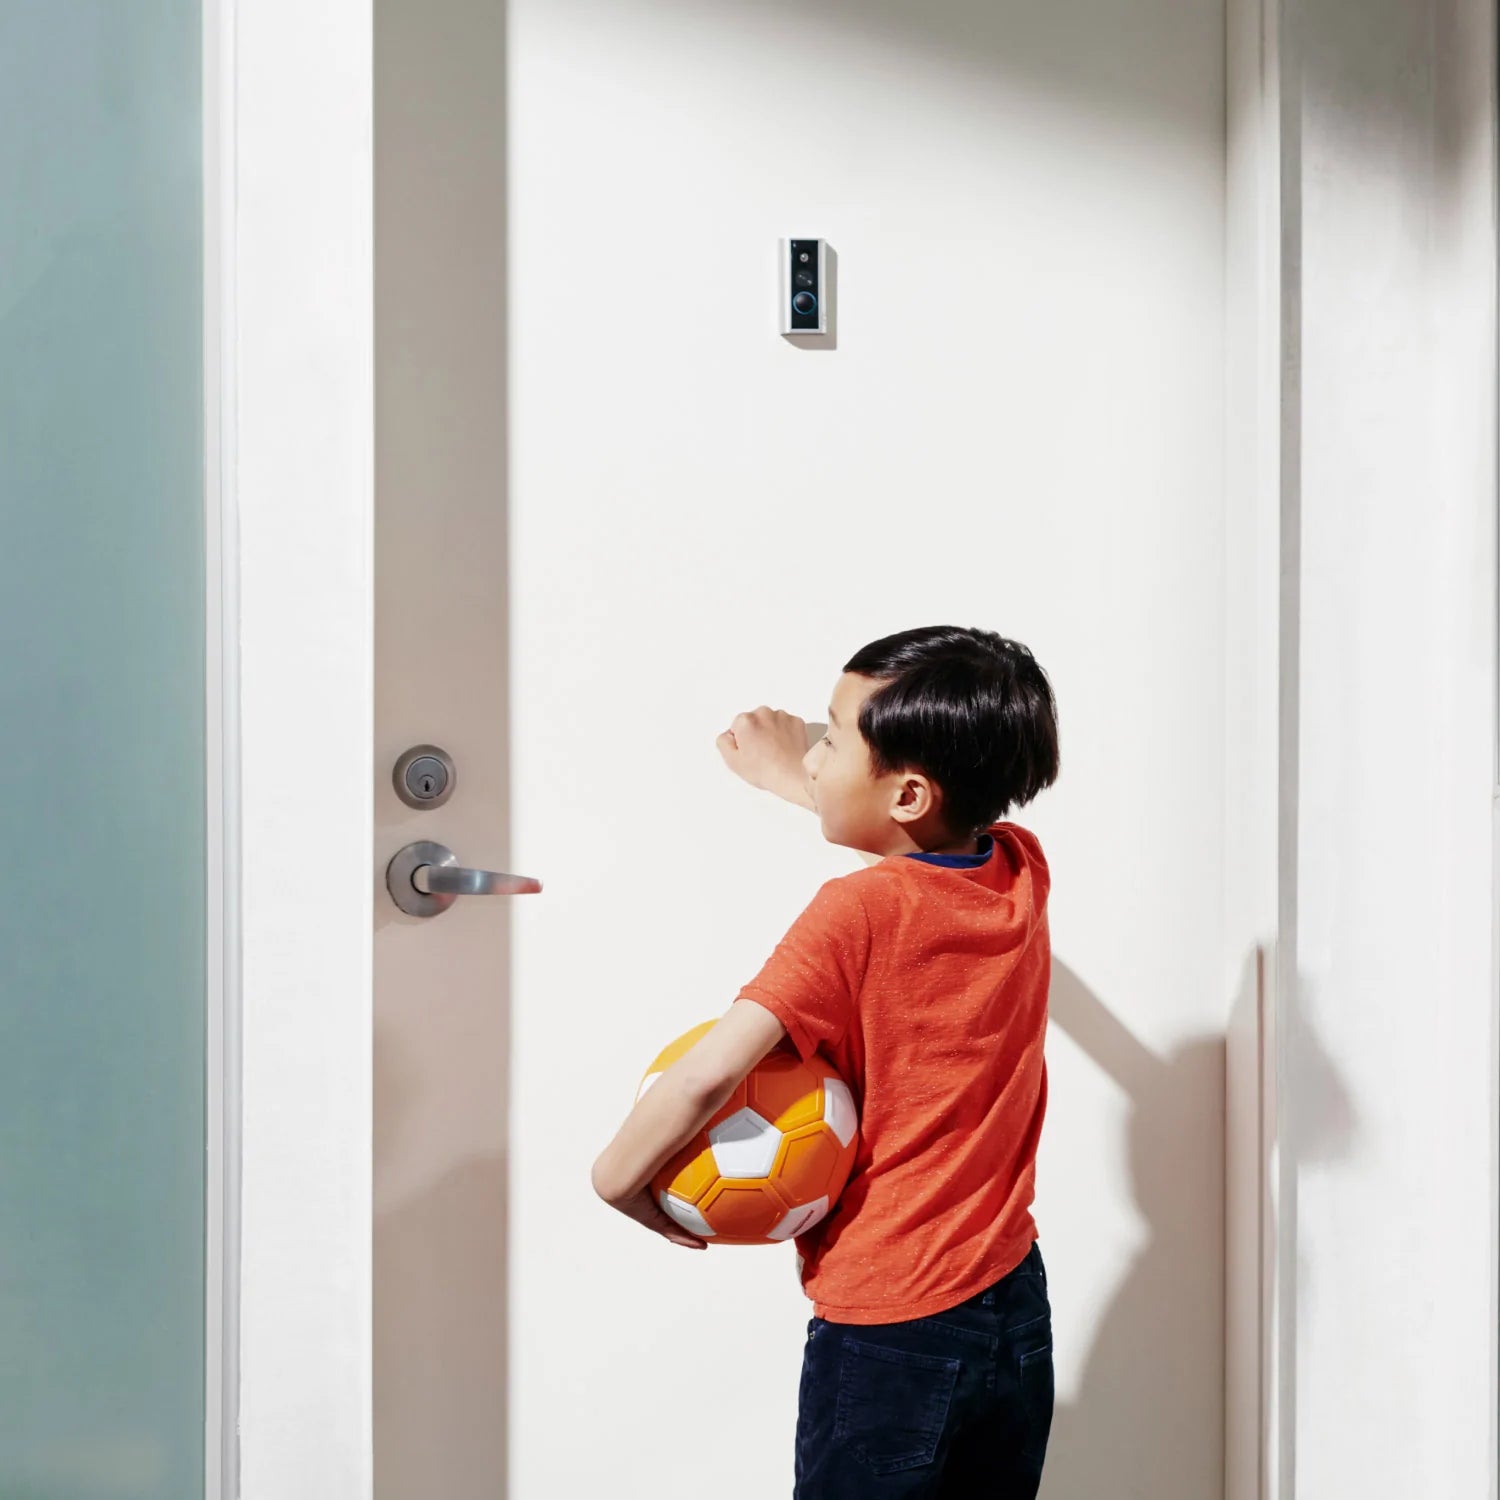 Peephole Cam (Video Doorbell) - In apartment building hallway, a child knocks on front door with Peephole Cam Video Doorbell installed.